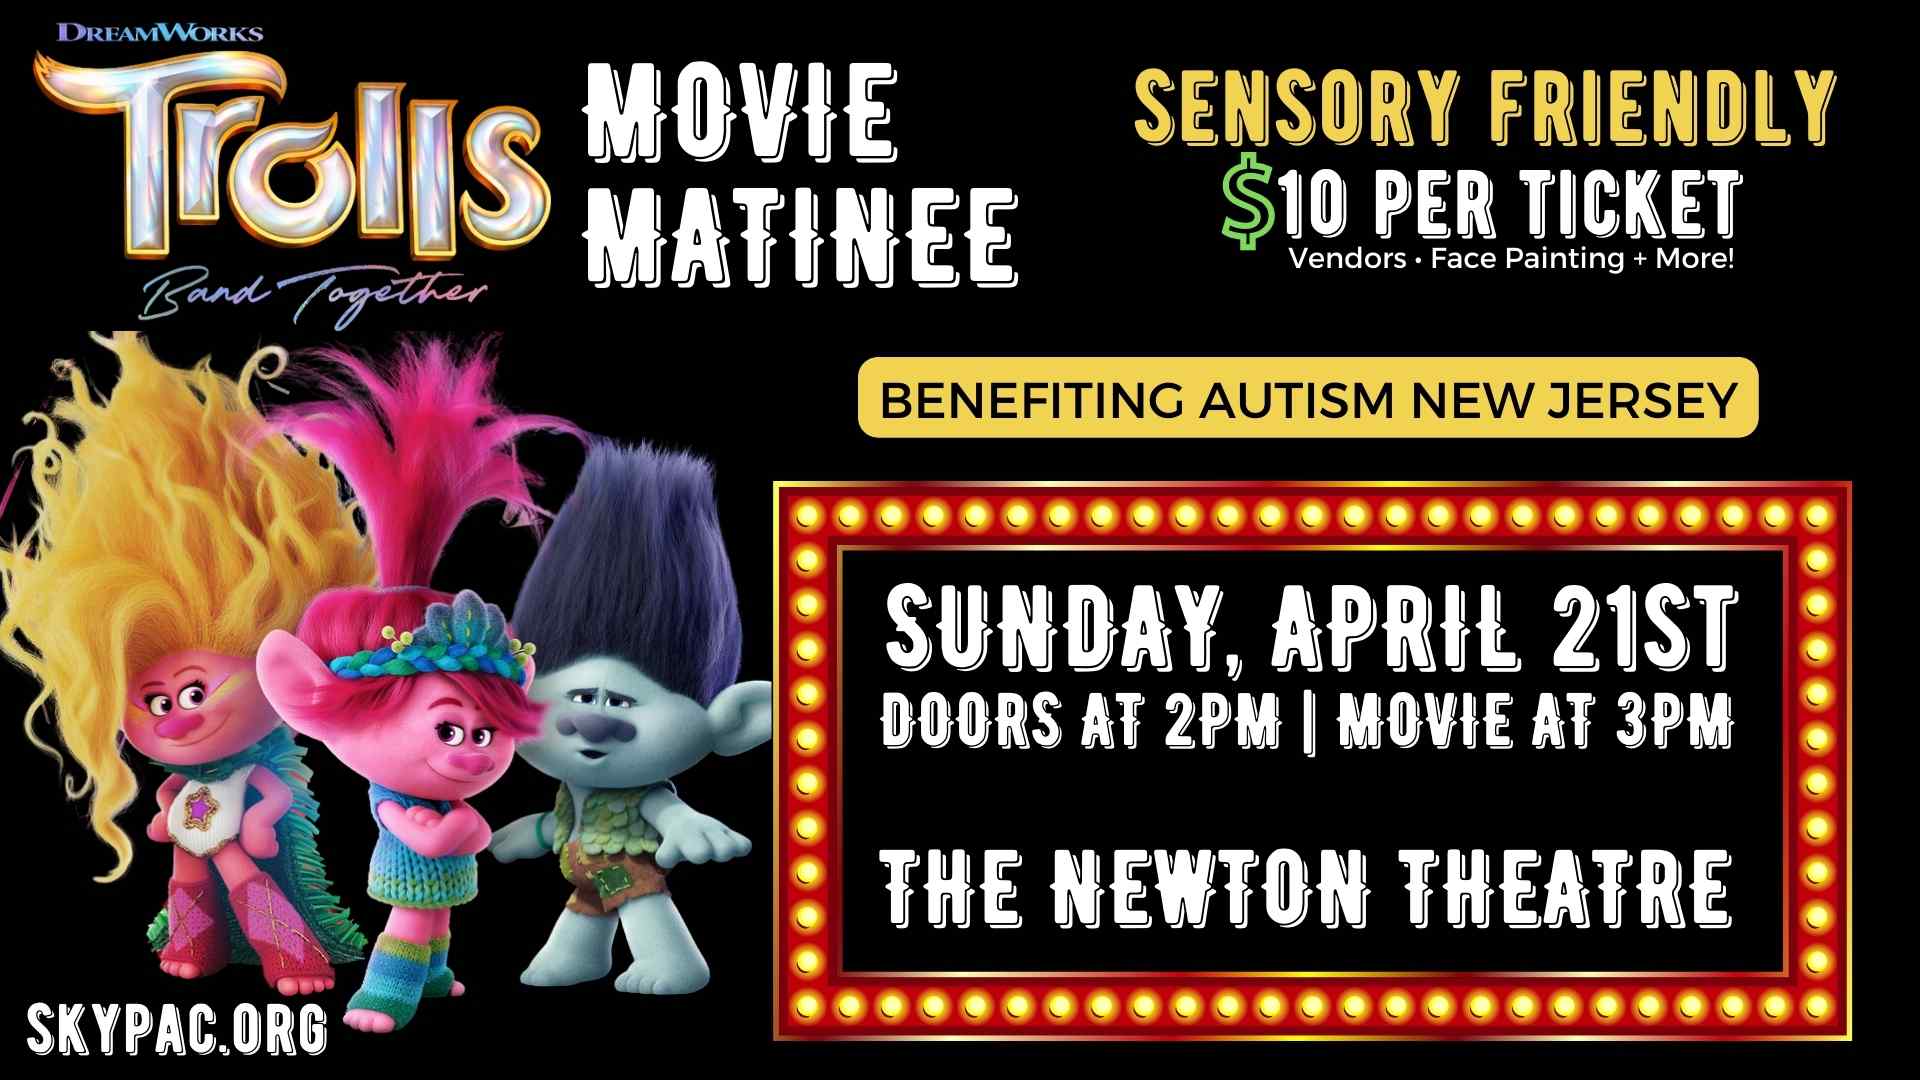 Autism Awareness Month - Trolls Movie Matinee at The Newton Theatre